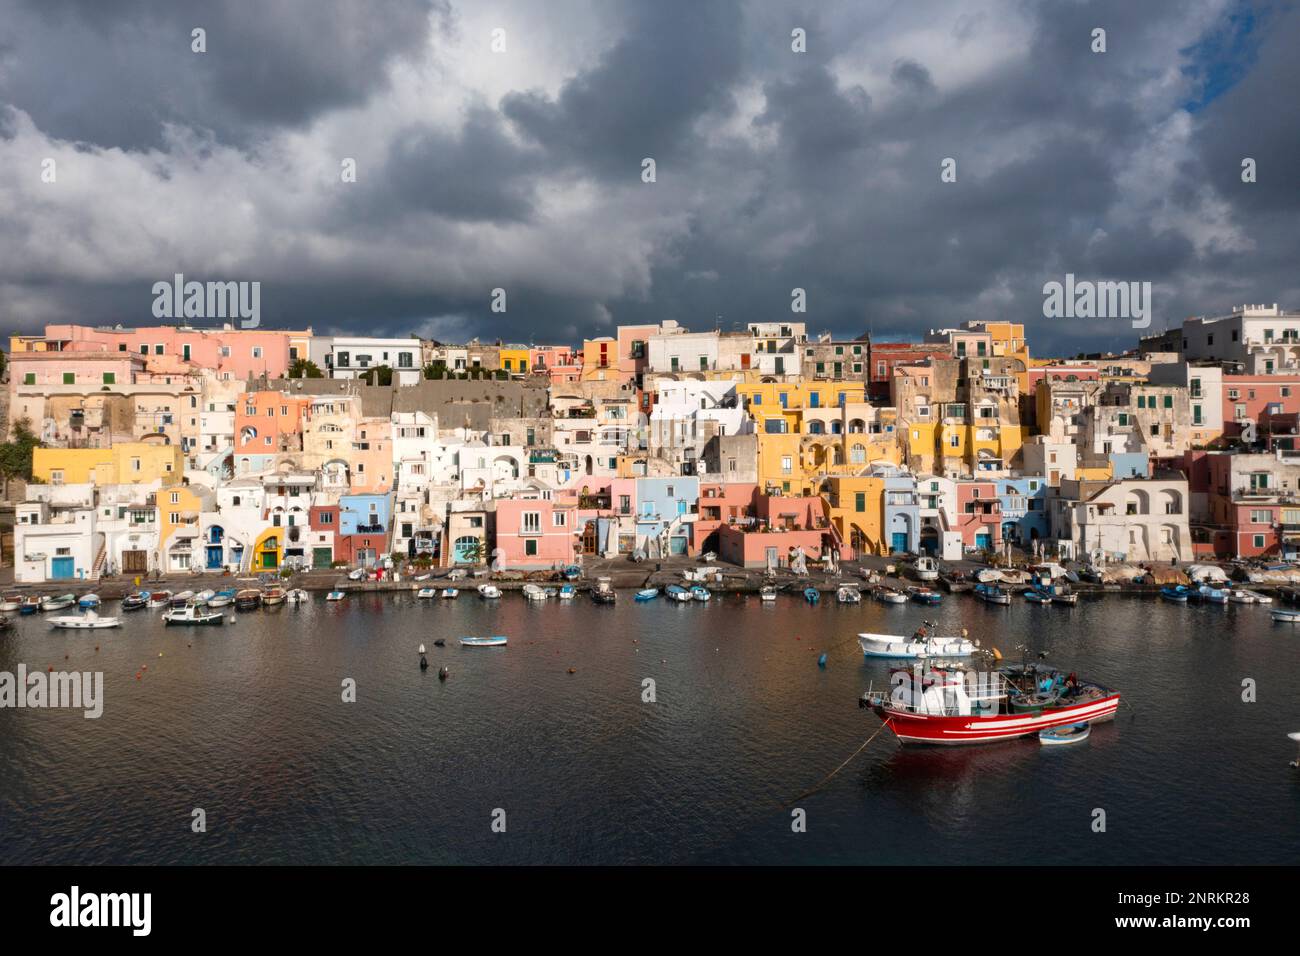 View of the Port of Corricella with lots of colorful houses on a sunny day in Procida Island, Italy. Stock Photo